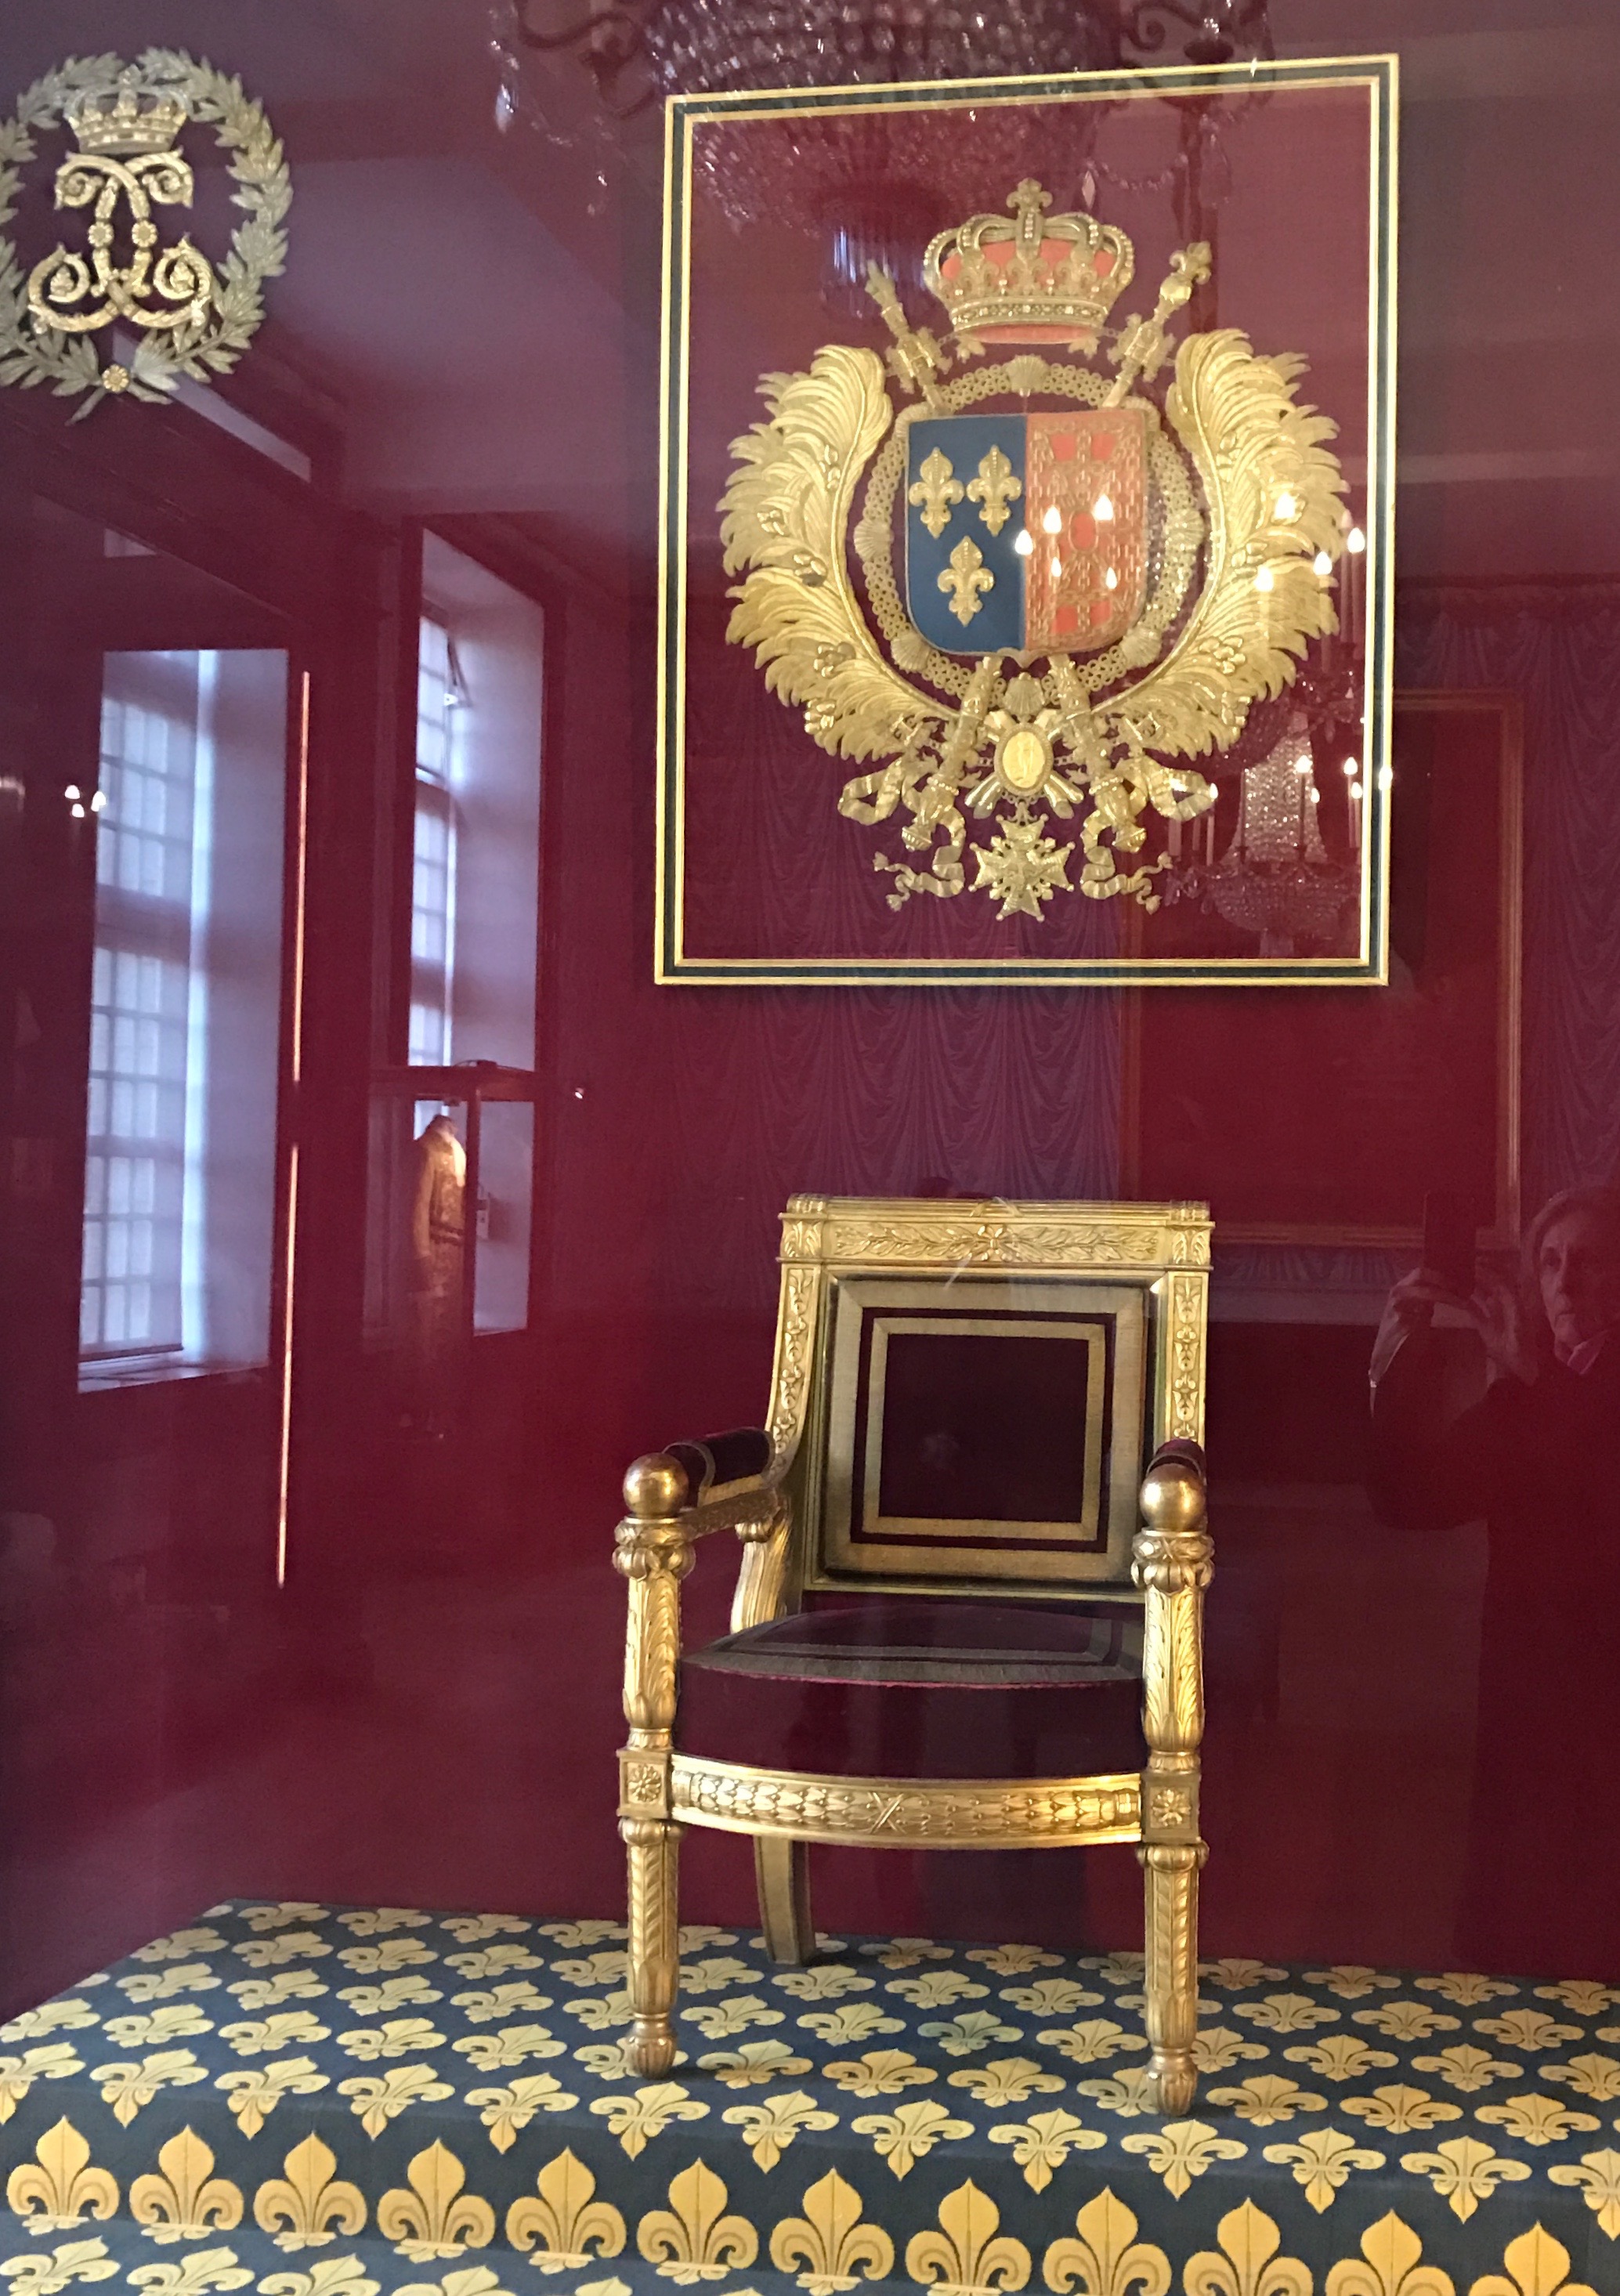 The French throne - now housed in the Palais du Tau.